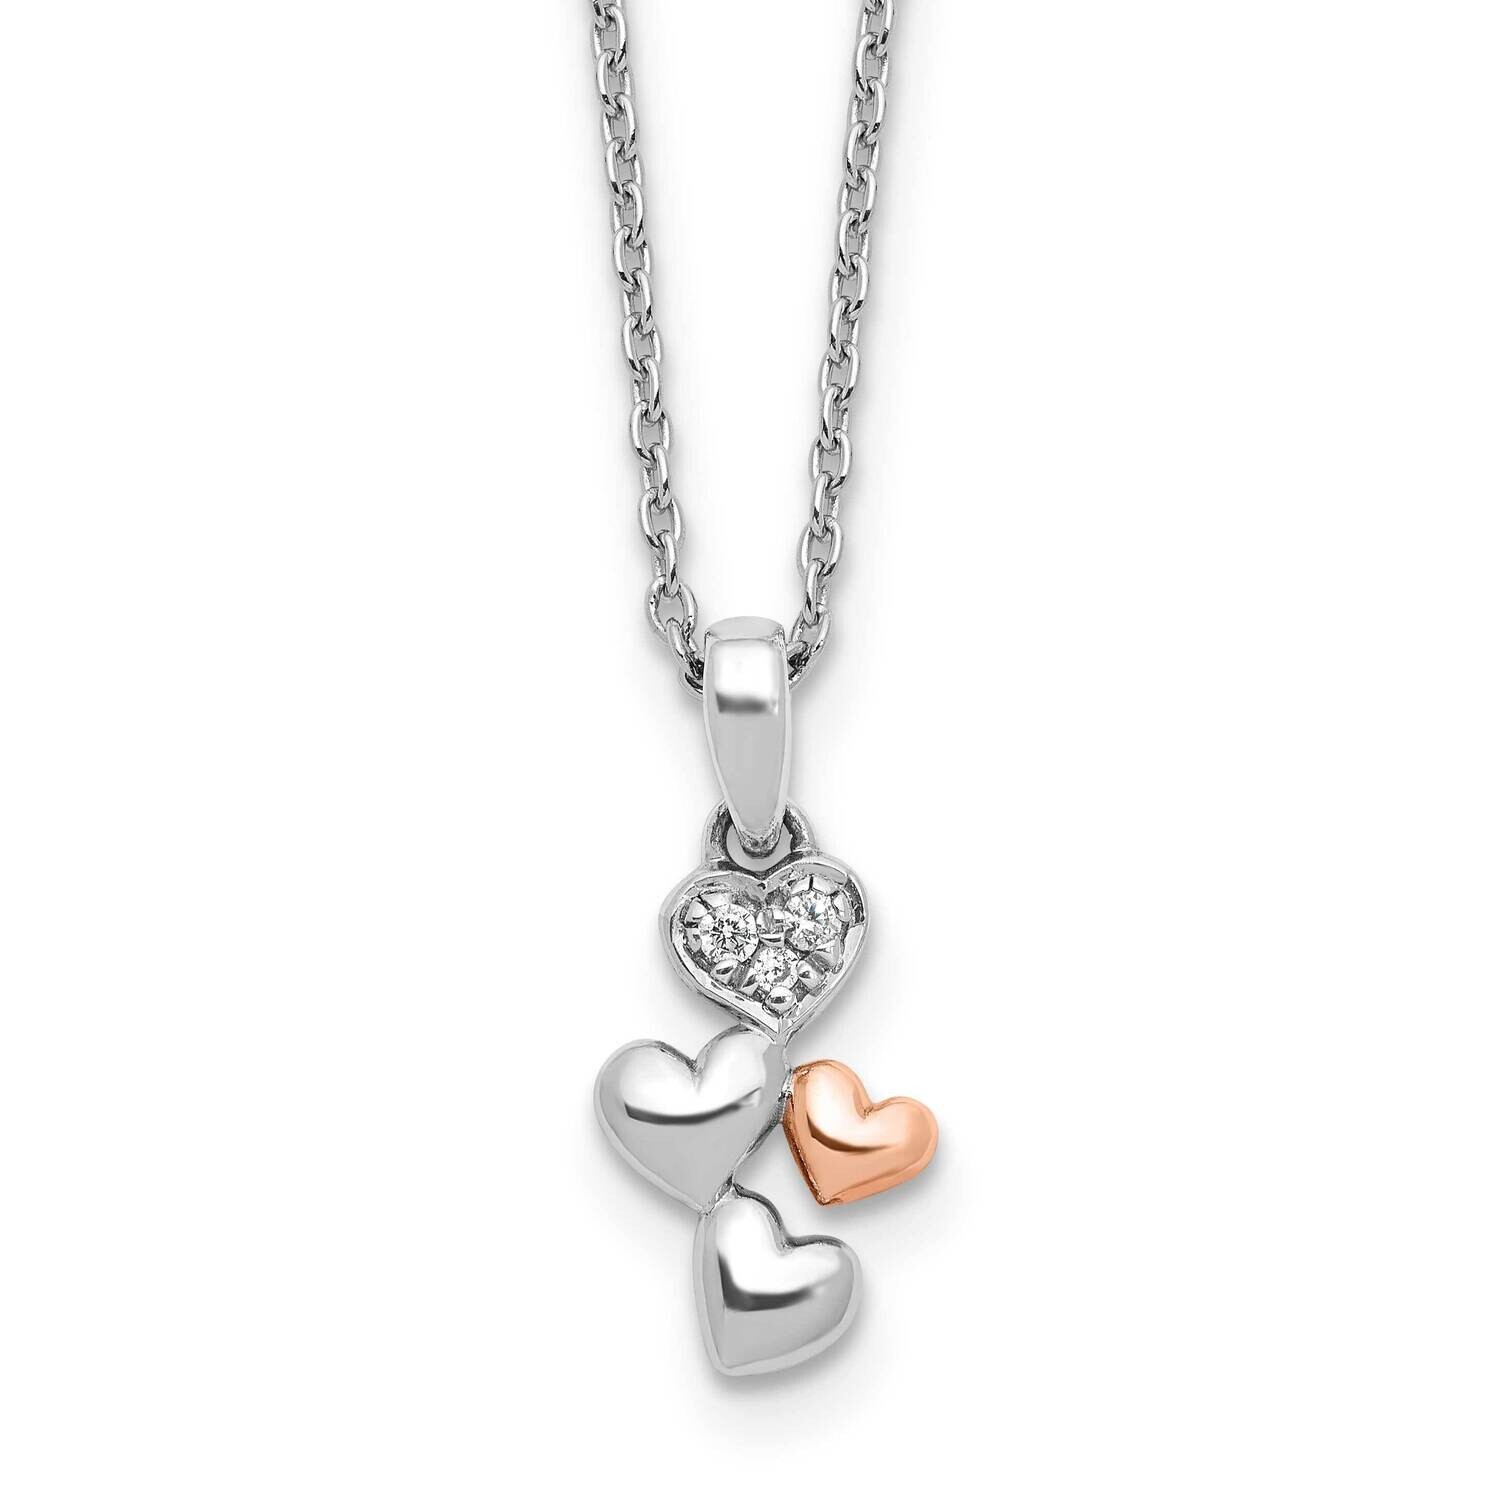 Rh Plated White Ice Diamond Heart Rose-Tone 2 Inch Extension Necklace Sterling Silver QW566-18